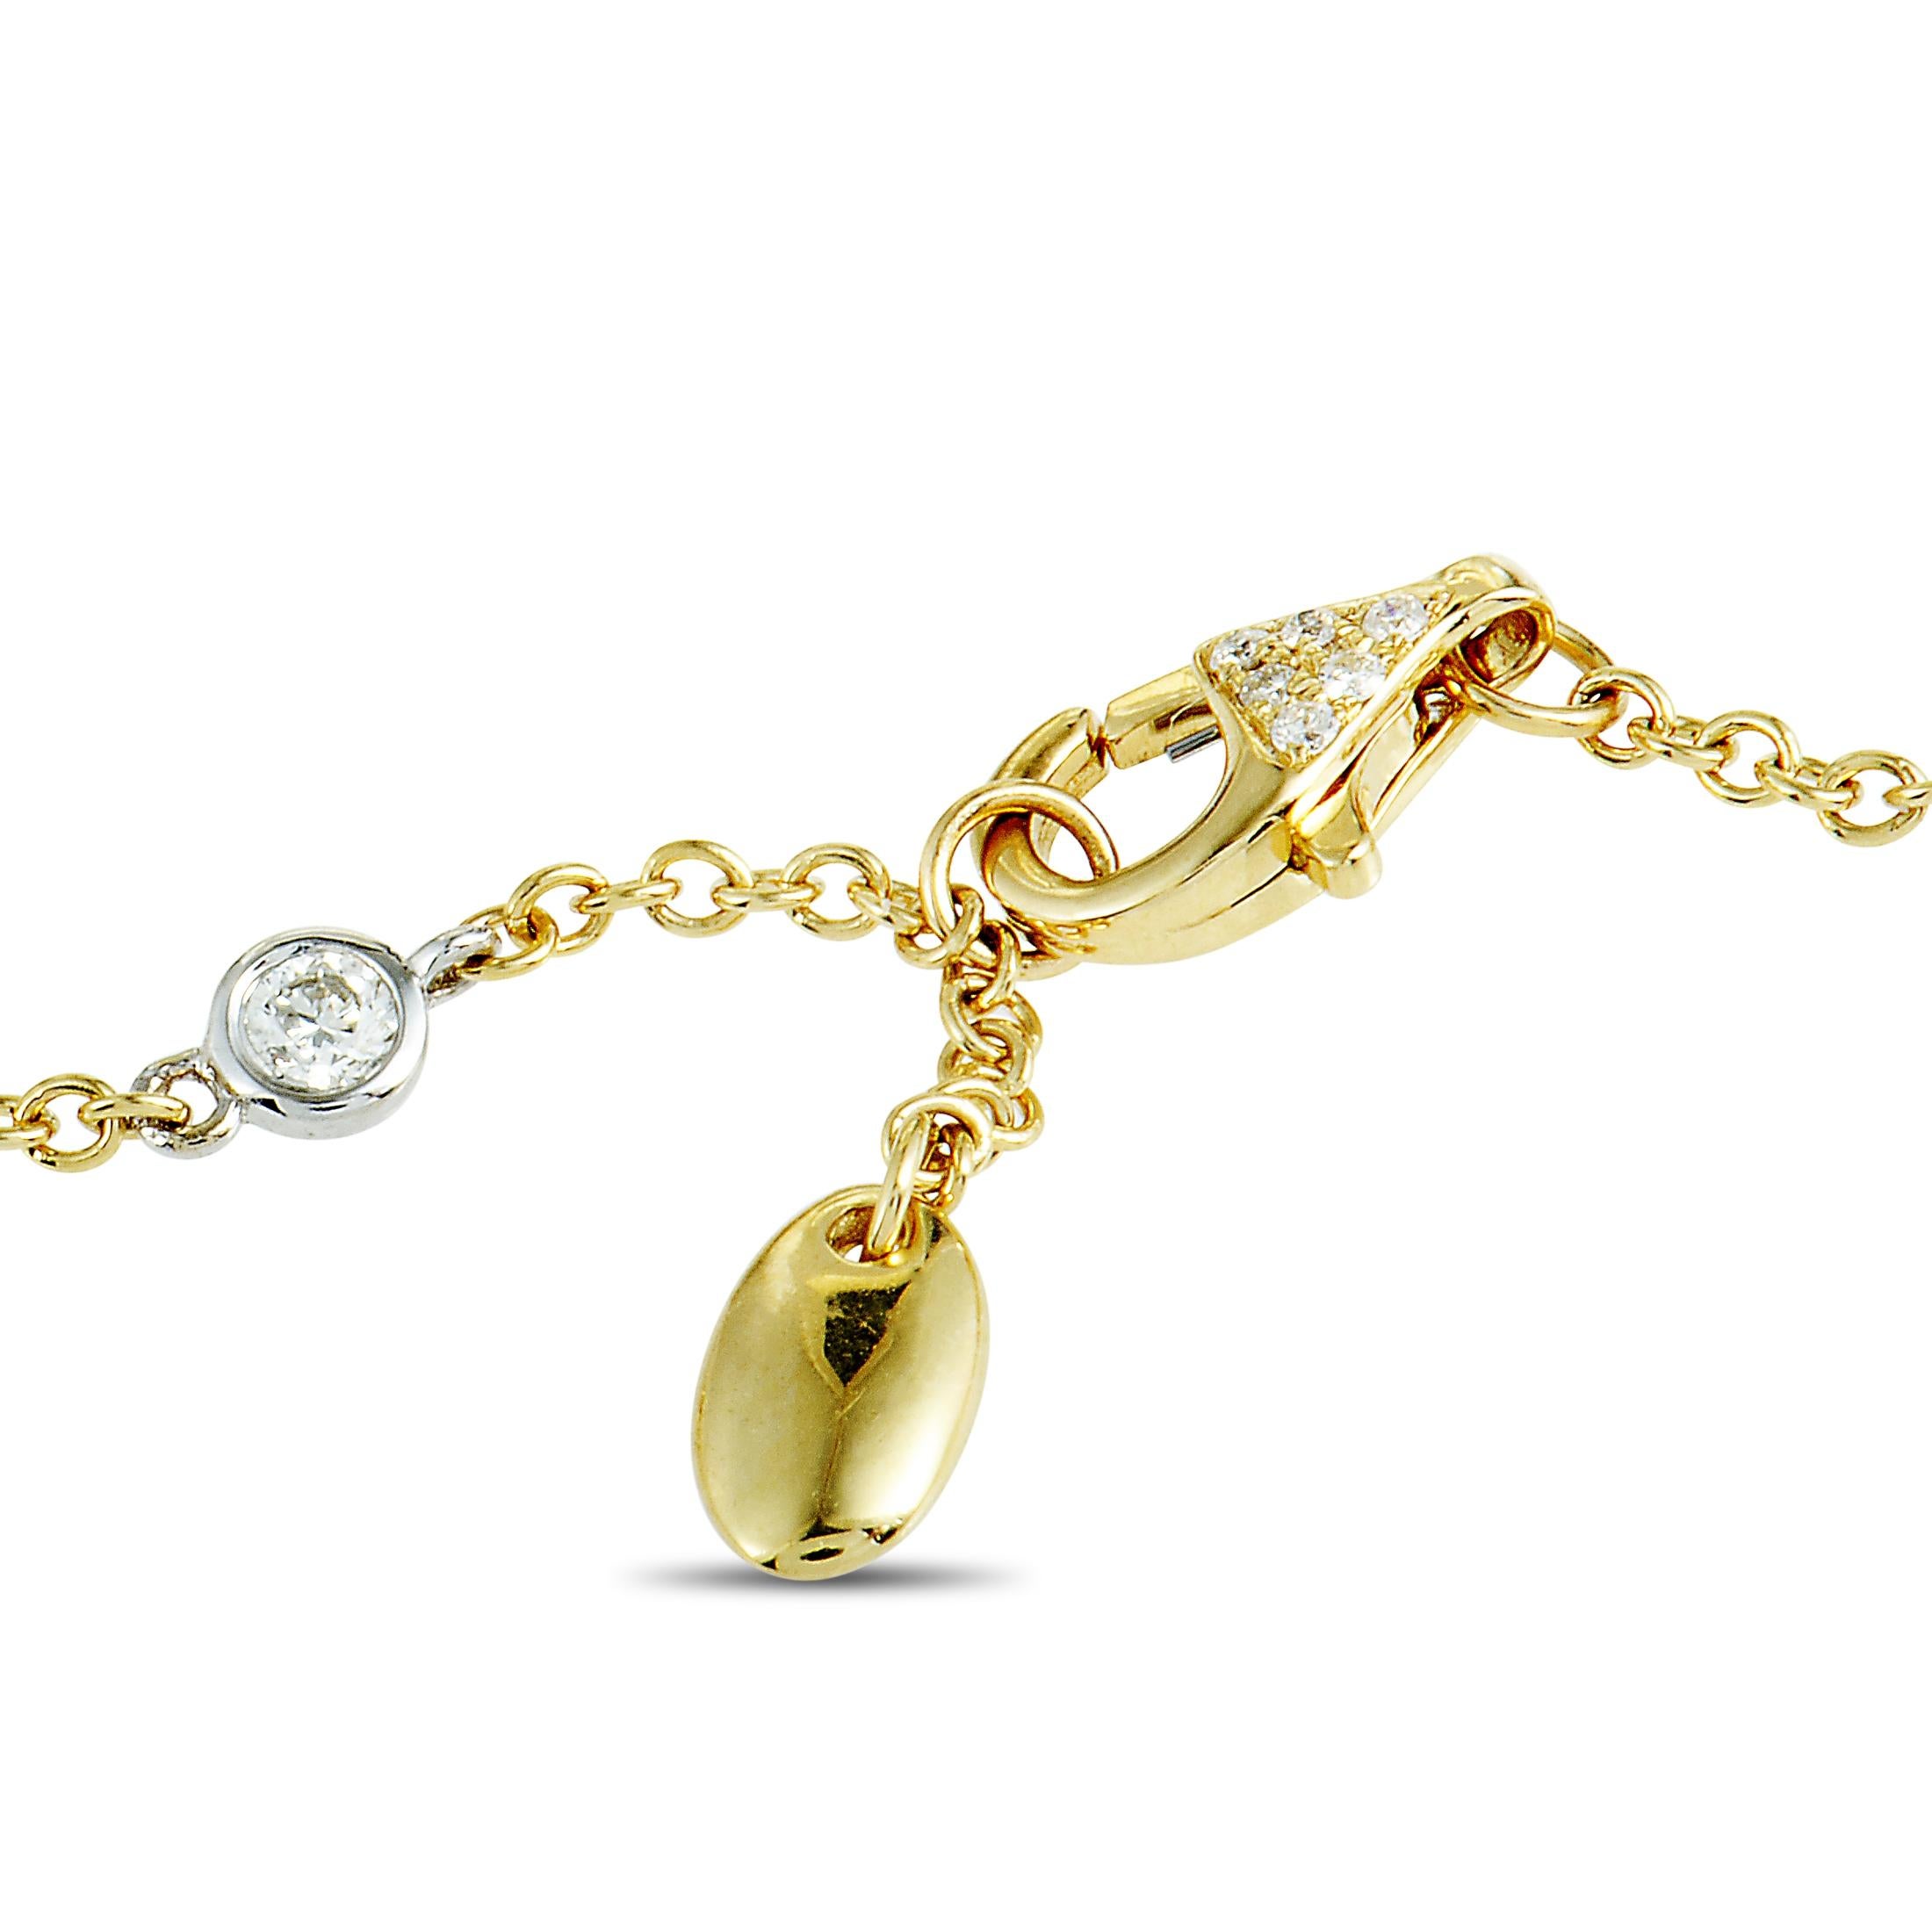 Women's LB Exclusive 18 Karat Gold and Round and Marquise Diamonds Long Sautoir Necklace